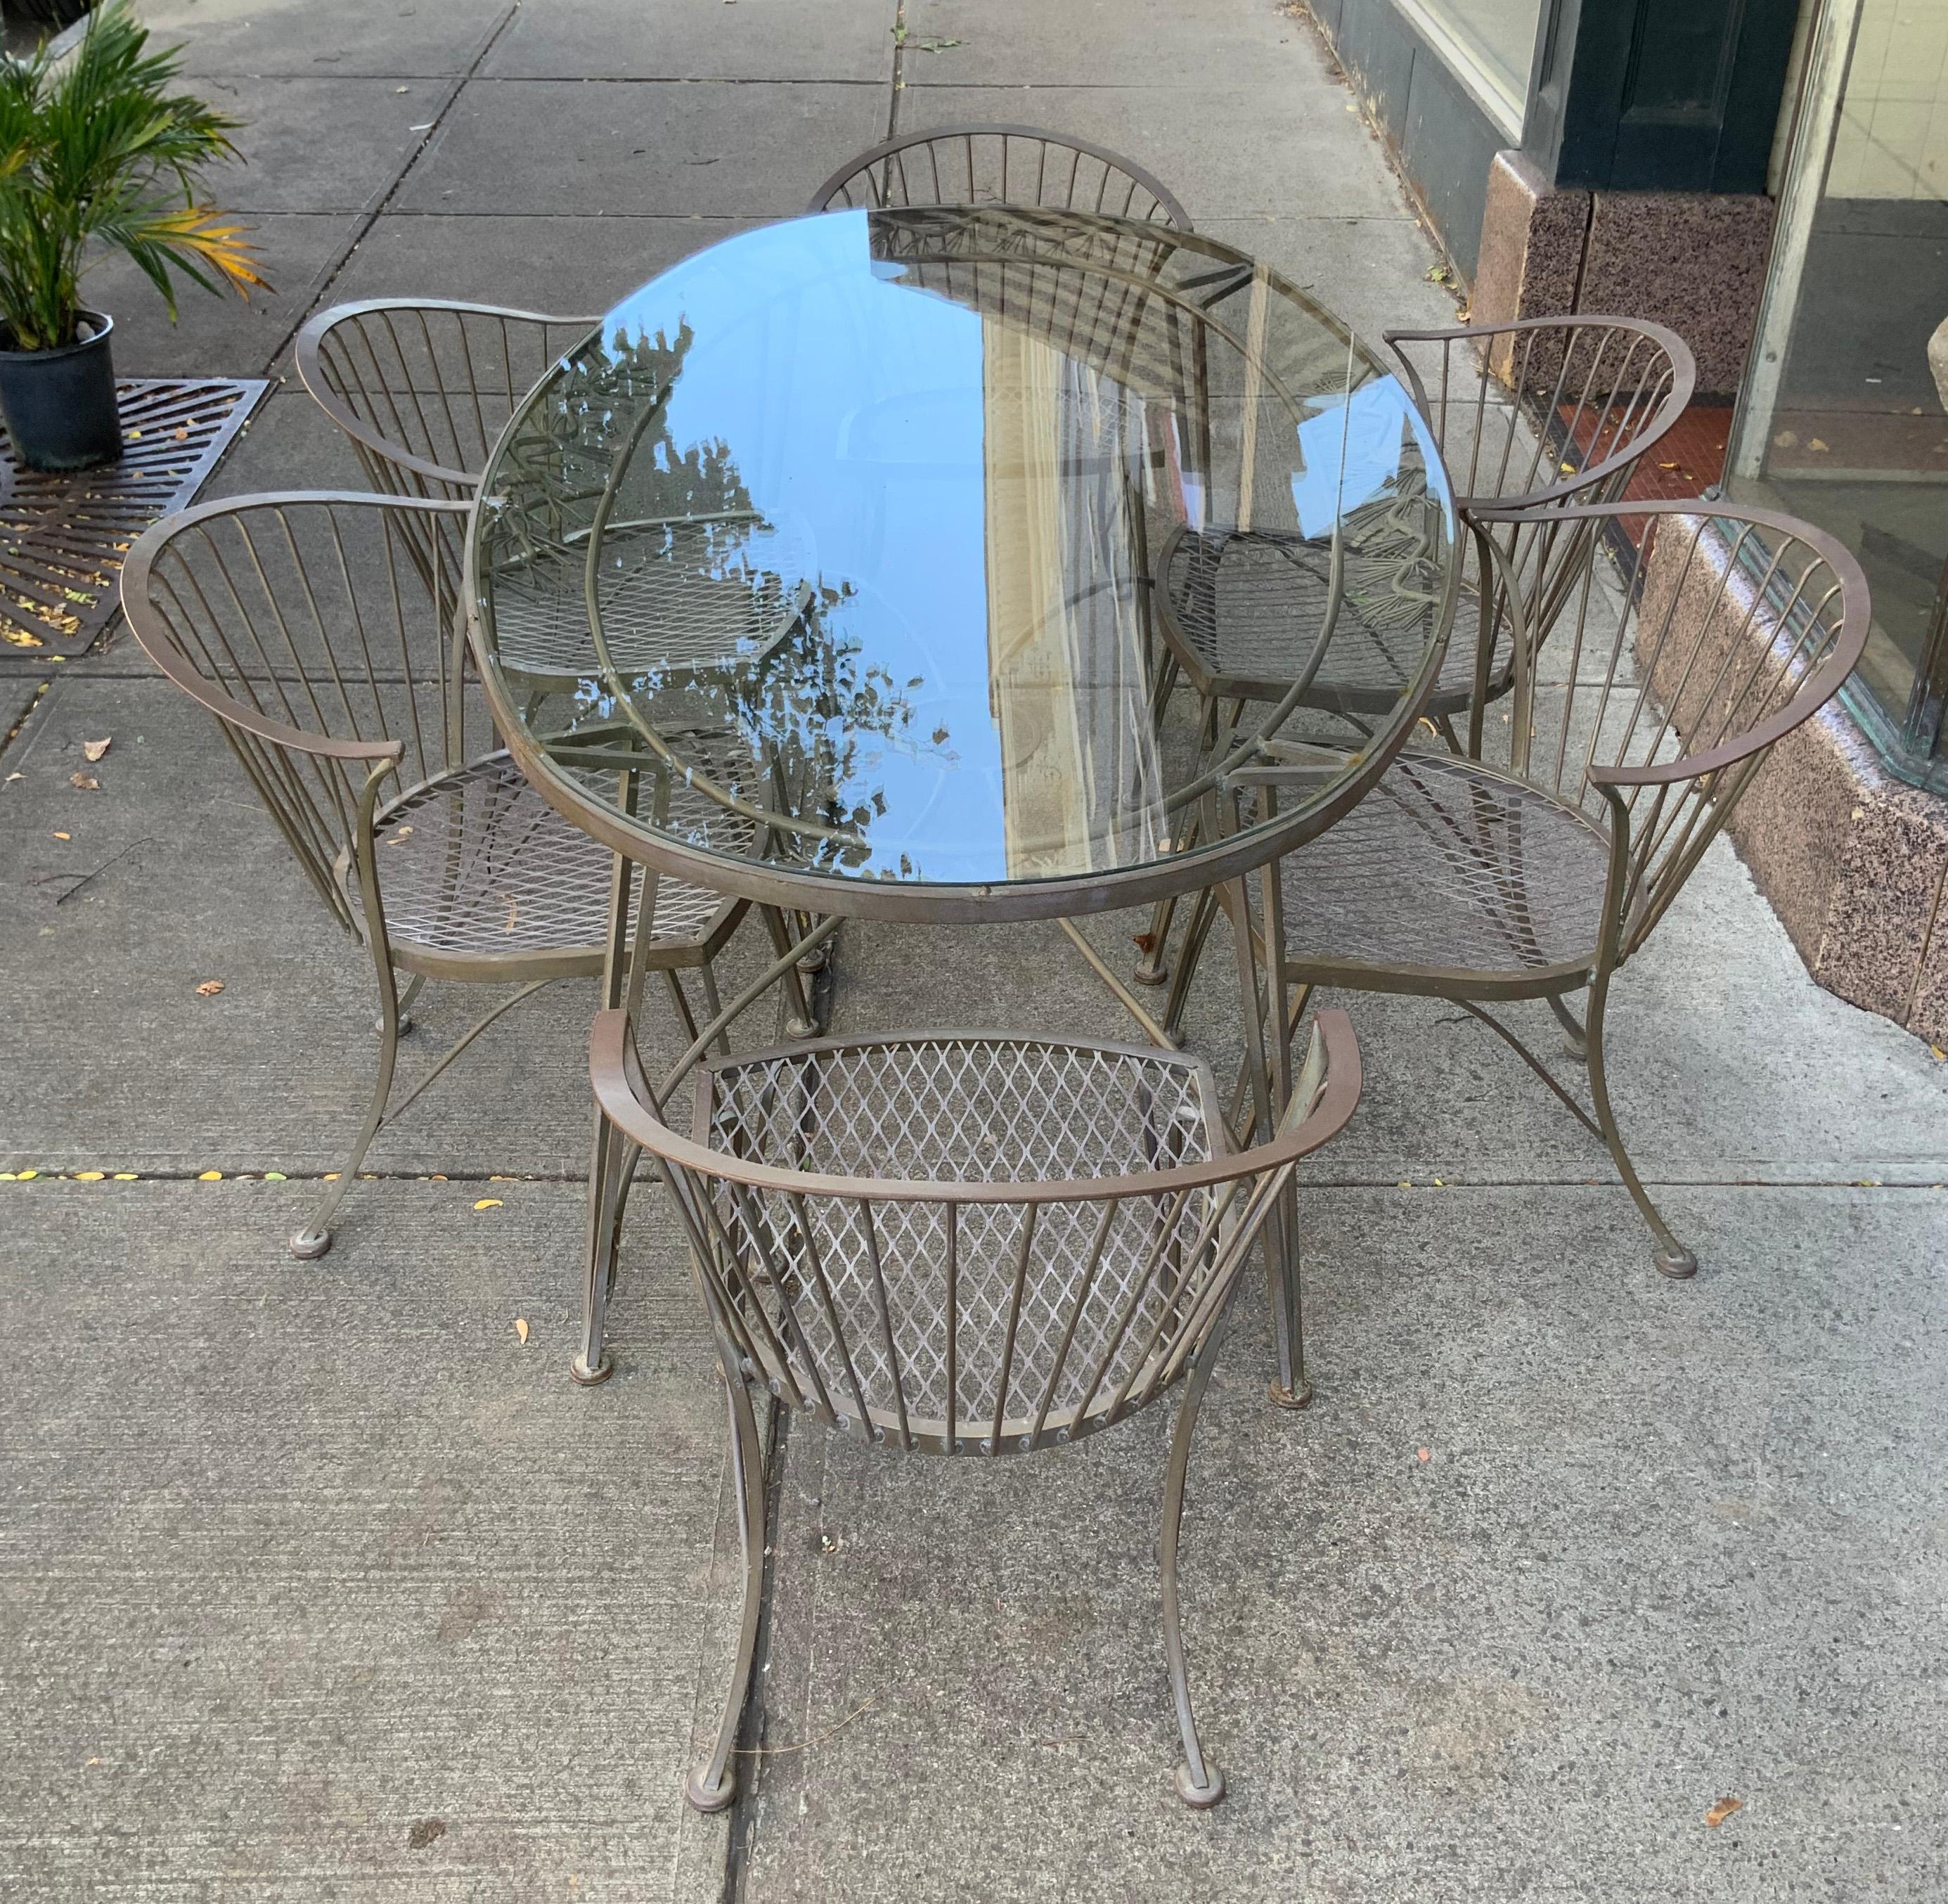 A vintage 1950s wrought iron garden dining set by Woodard. 'Pinecrest' was one of their most charming designs in the 1950s, named for the pine needle motif in the skirt of the dining table. this set consists of the large oval dining table, with the